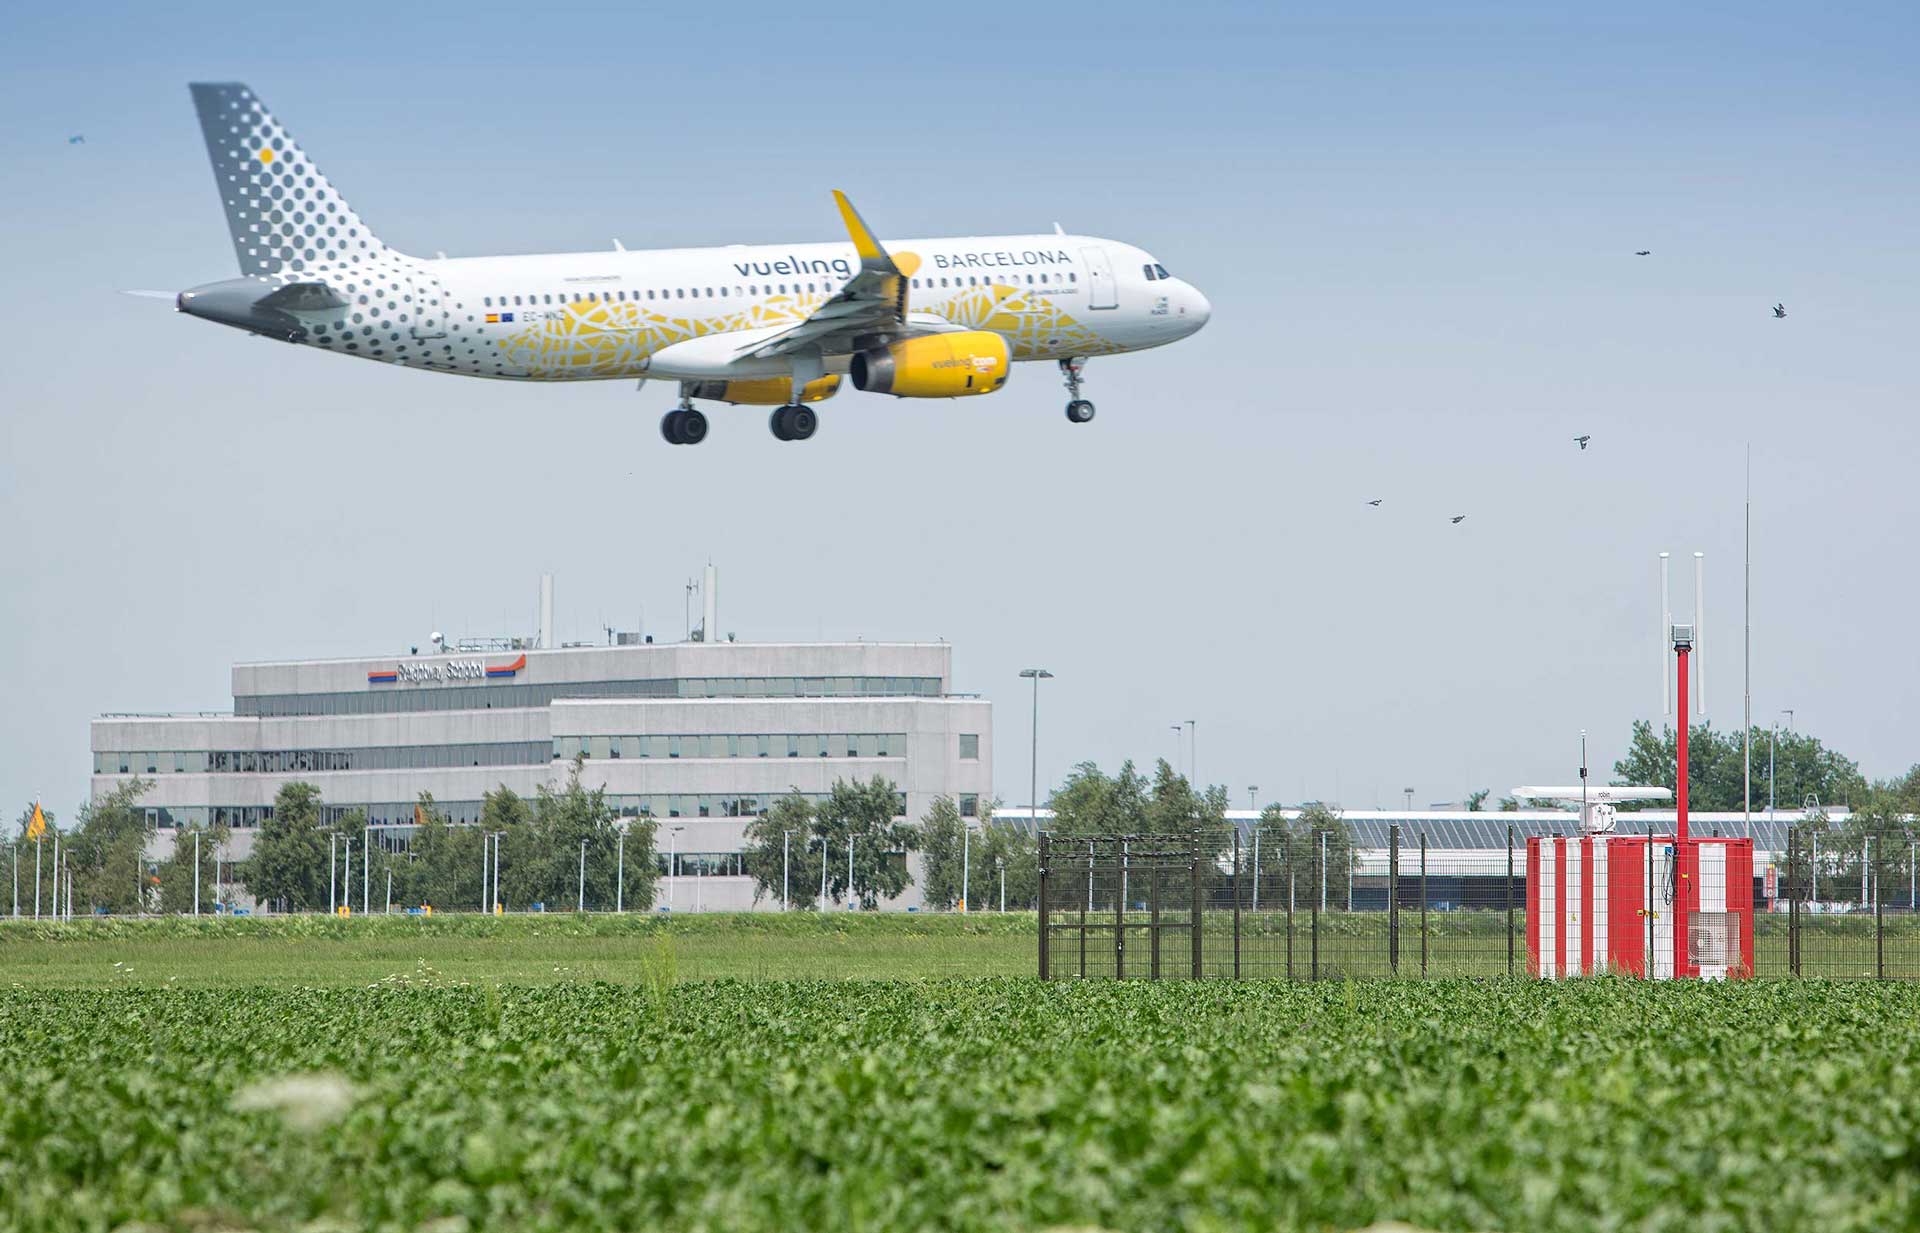 Commercial aeroplane approaching a runway at Schiphol airport